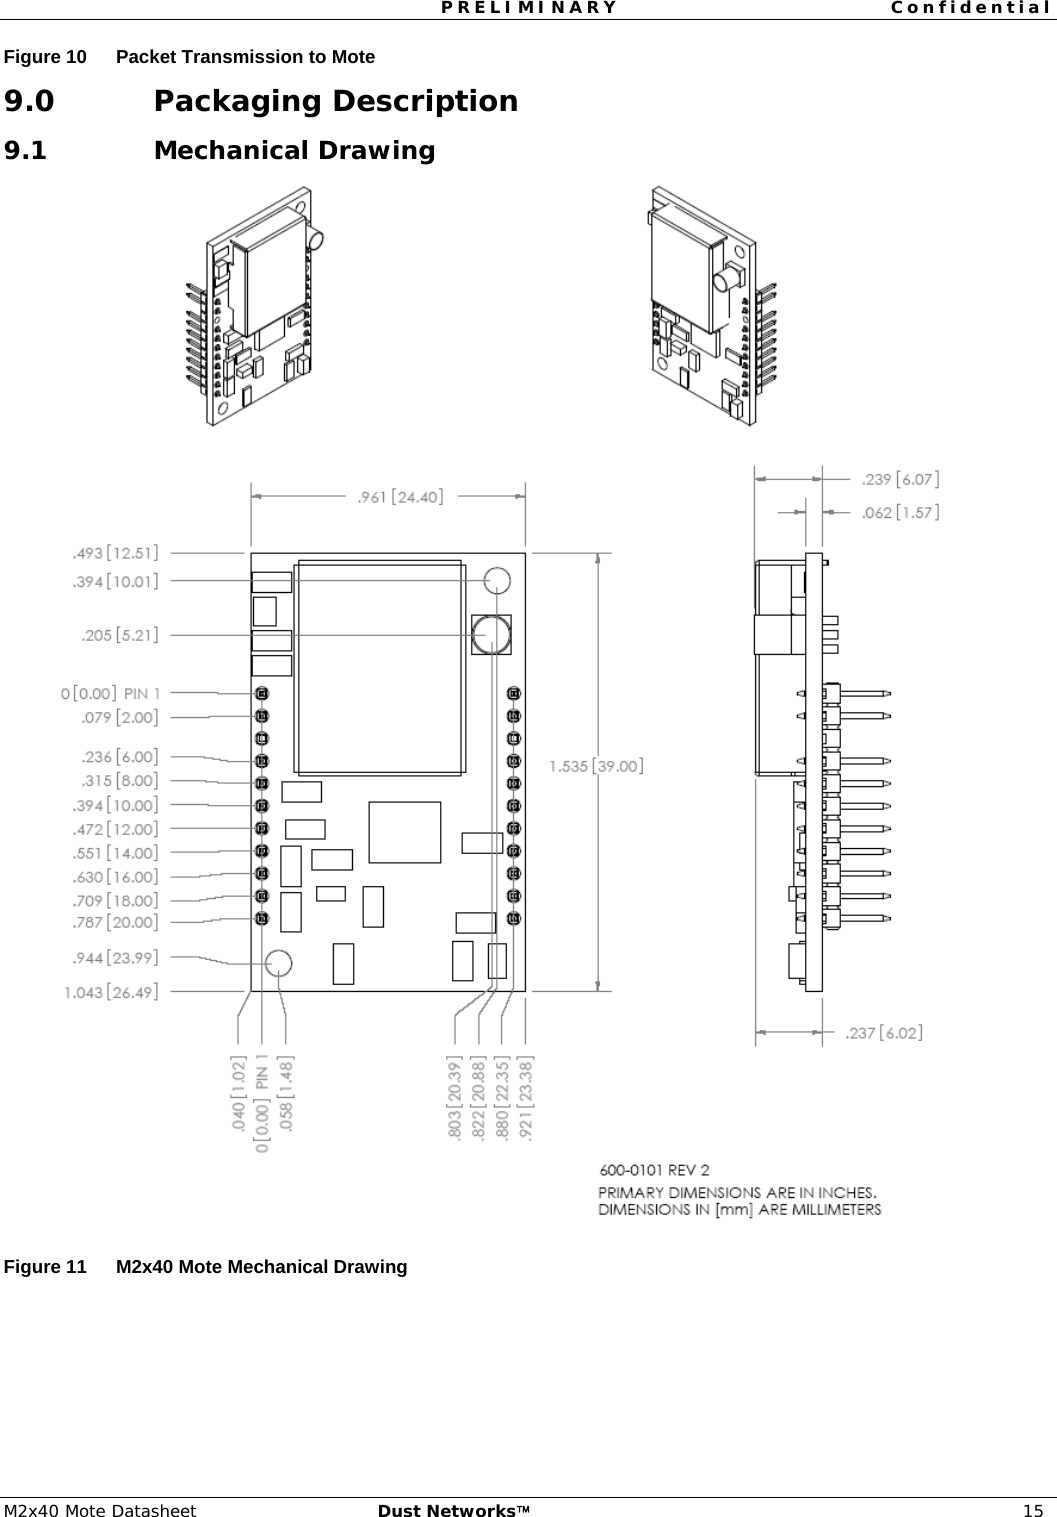 PRELIMINARY Confidential  M2x40 Mote Datasheet  Dust Networks™ 15 Figure 10  Packet Transmission to Mote 9.0 Packaging Description 9.1 Mechanical Drawing  Figure 11  M2x40 Mote Mechanical Drawing 